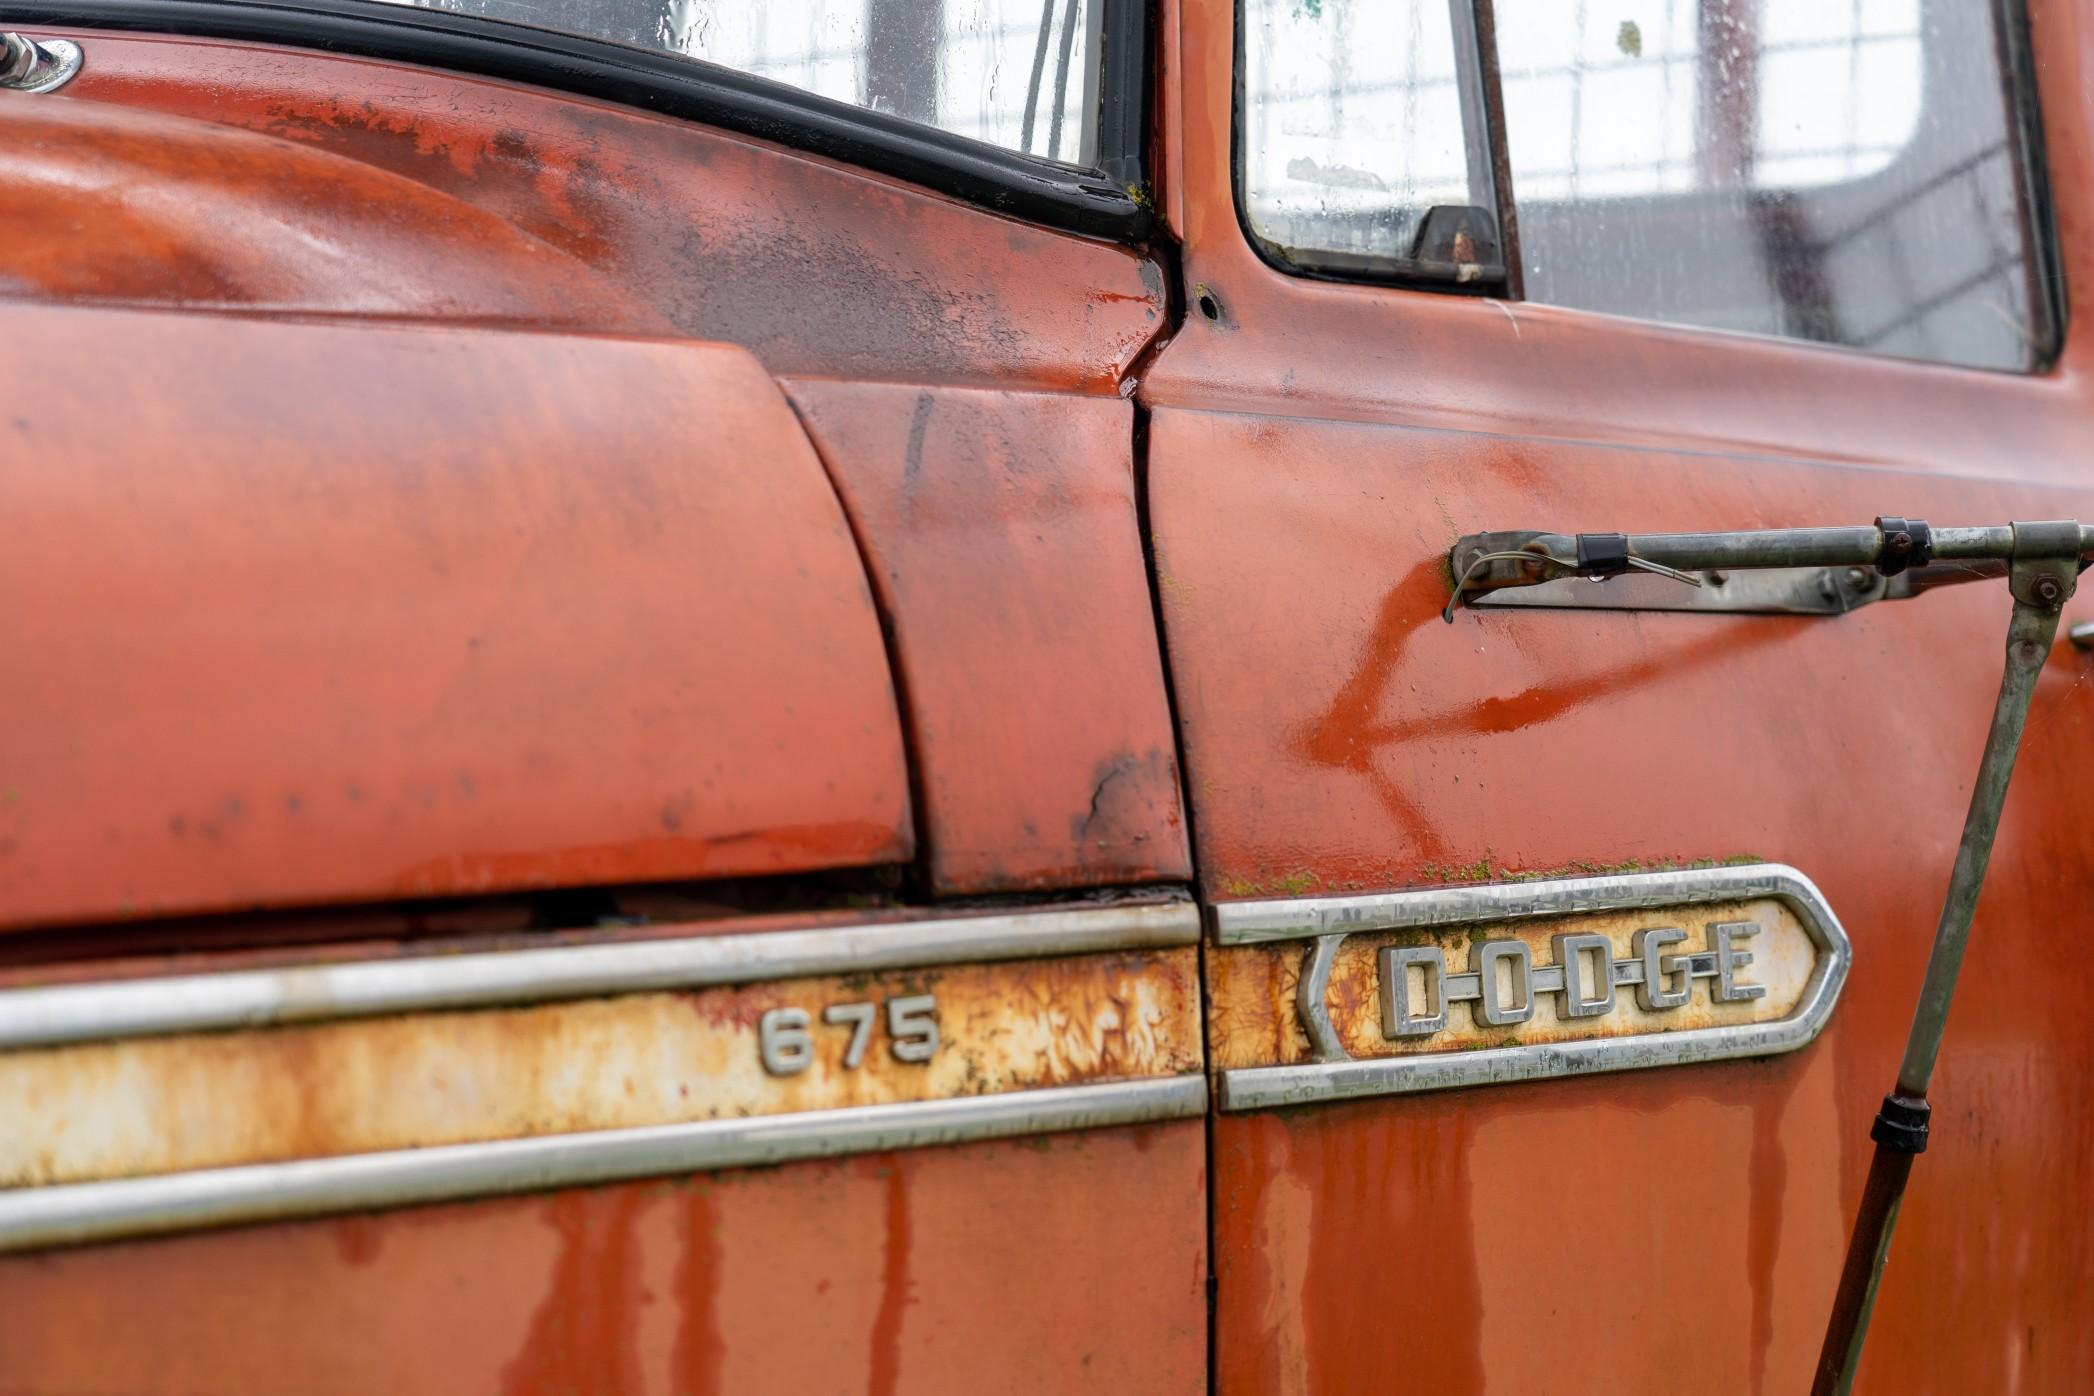 If you love classic trucks then you might have heard of the Dodge ‘Lil Red Express.